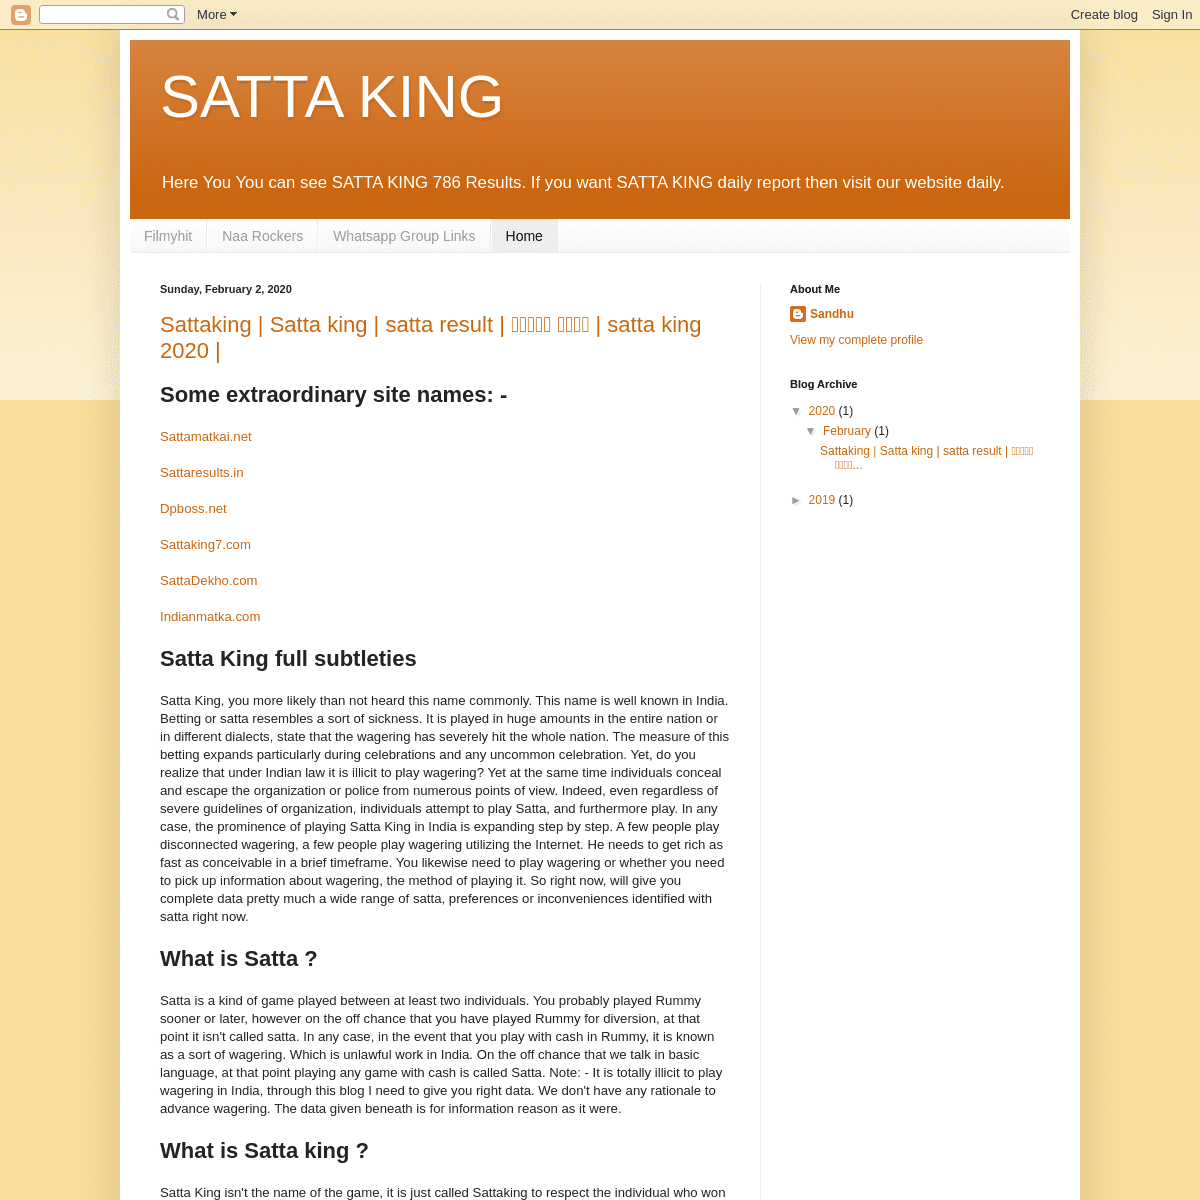 A complete backup of https://sattaking786s.blogspot.com/